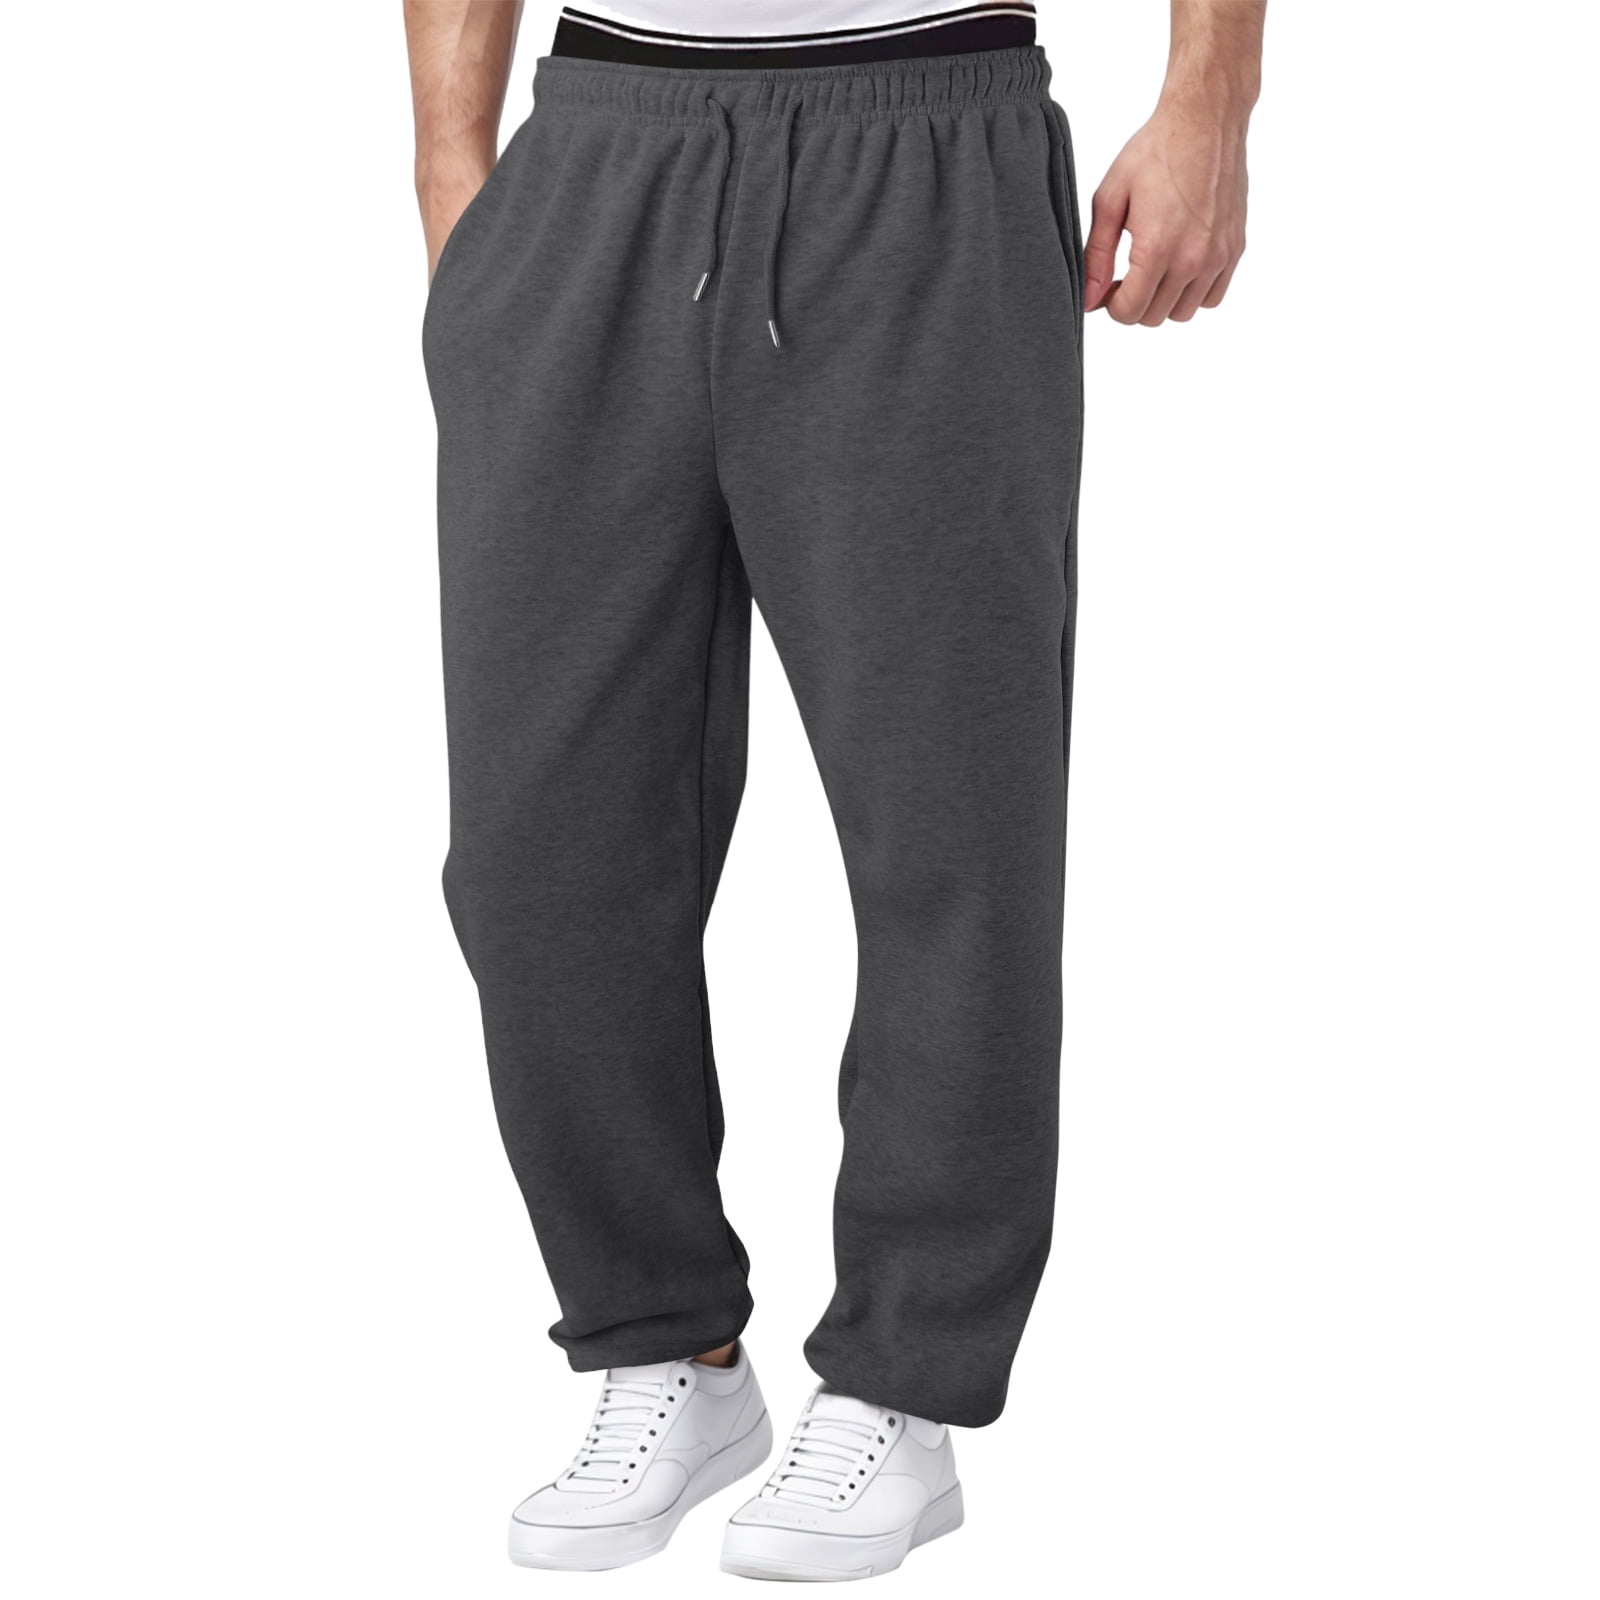 Mens Lined Sweatpants Large Size Wide Straight Leg Trousers Casual ...